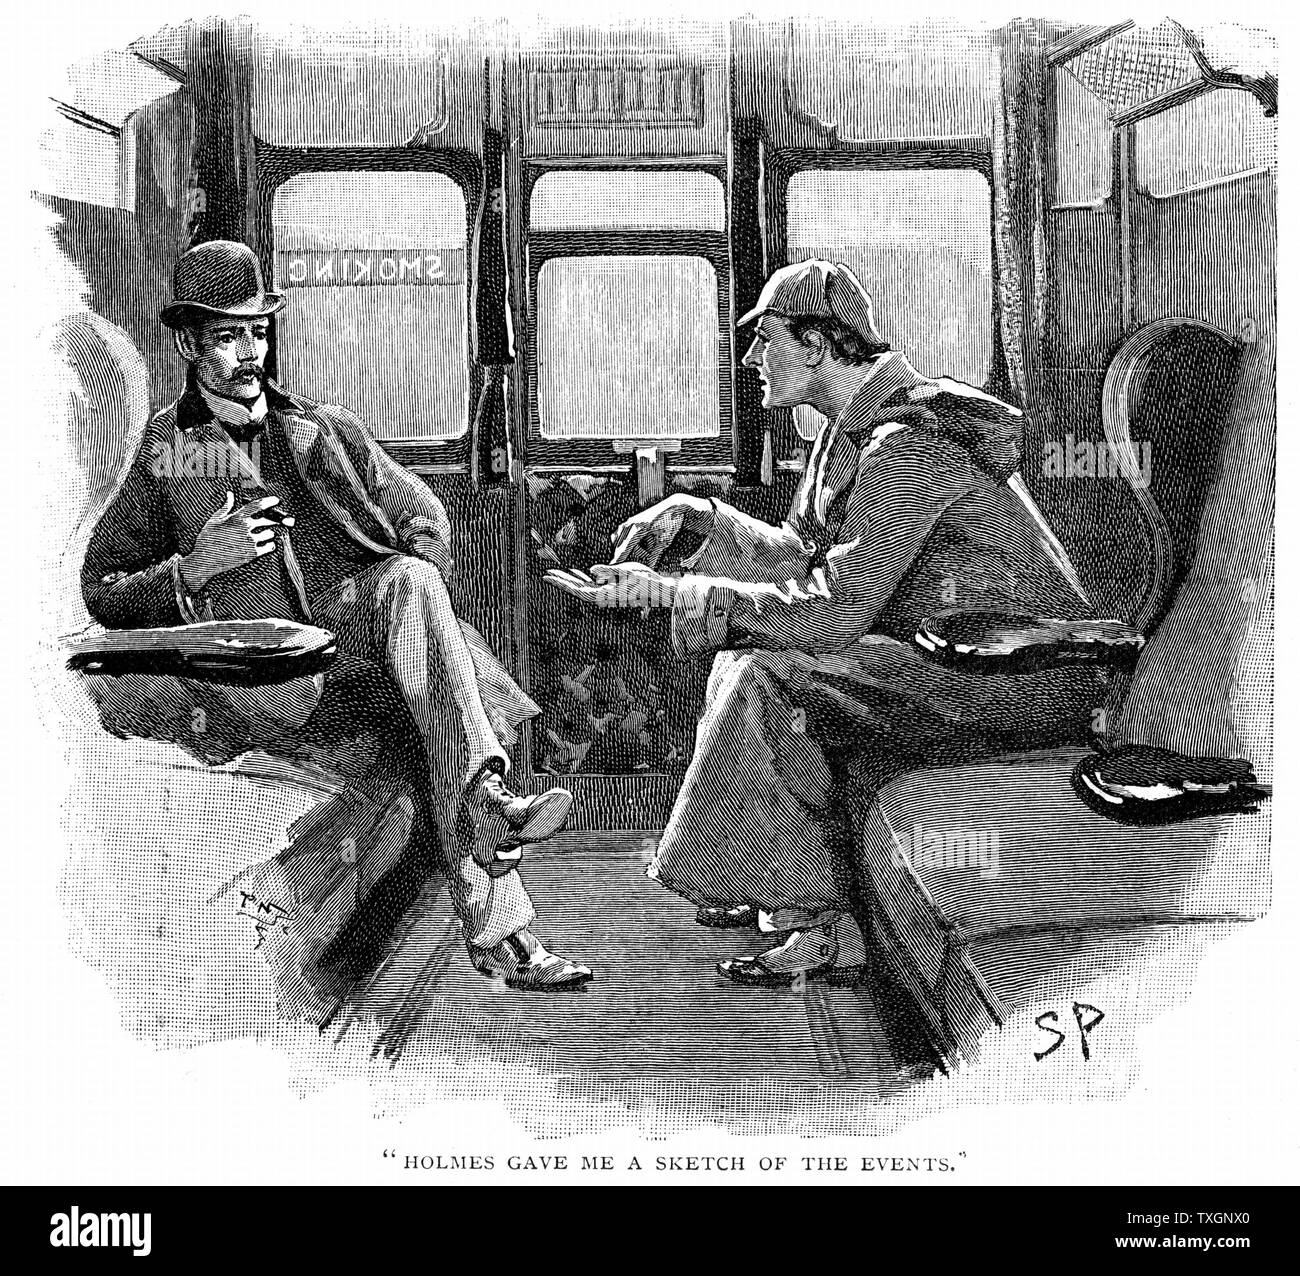 The Adventure of Silver Blaze':  'Holmes gave me a sketch of the events'.  Sherlock Holmes and Dr Watson on train to Devon to investigate a murder and the disappearance of a famous racehorse.  Arthur Conan Doyle's story published in 'The Strand Magazine', London, 1892, illustrated by Sidney E. Page, first artist to draw Sherlock Holmes. Engraving Stock Photo